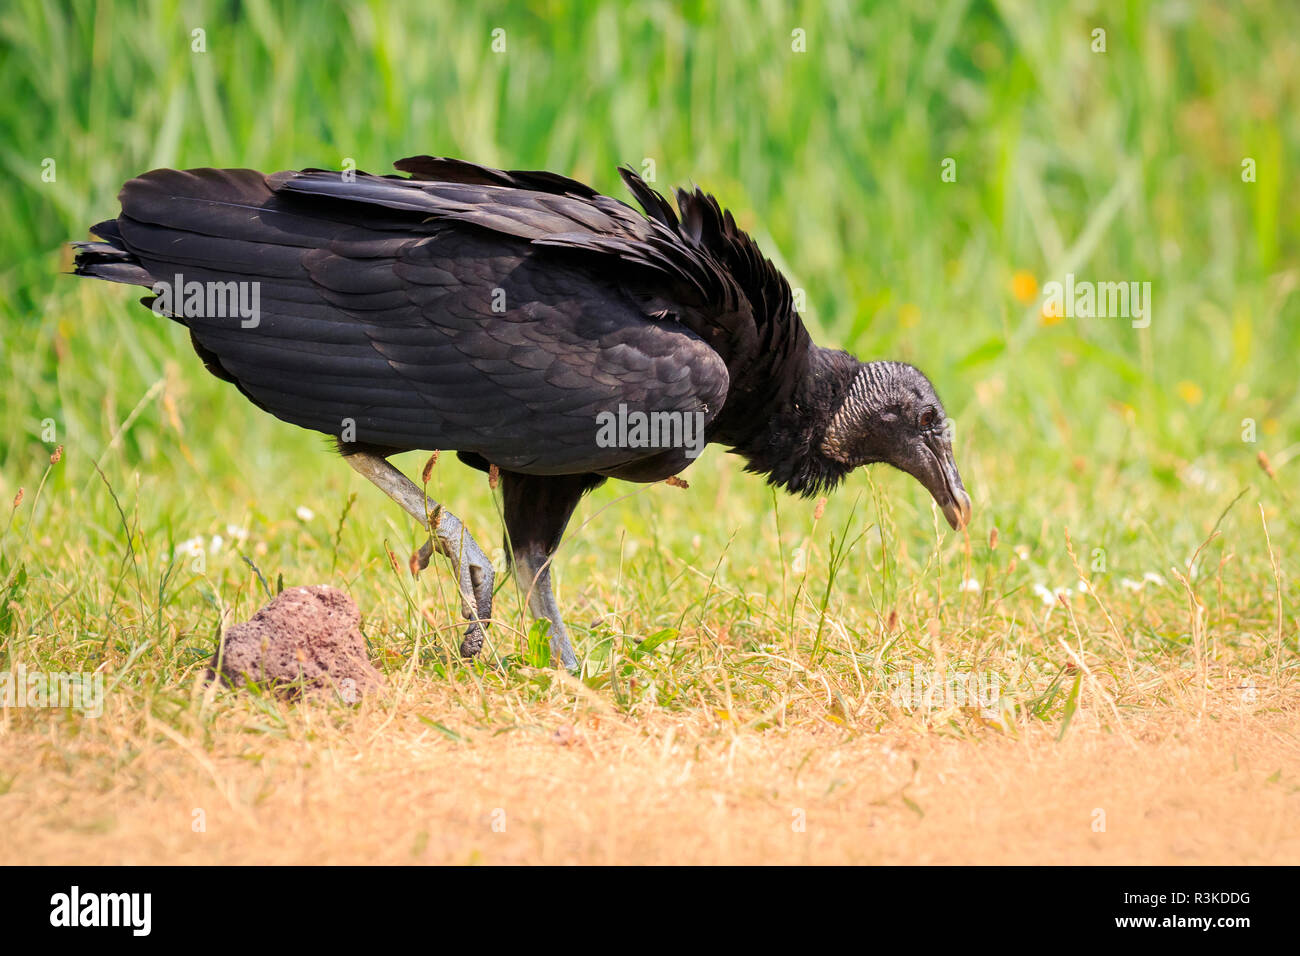 Closeup of a American black vulture Coragyps atratus walking and foraging in a green meadow. This is a scavenger and feeds on carrion. Stock Photo